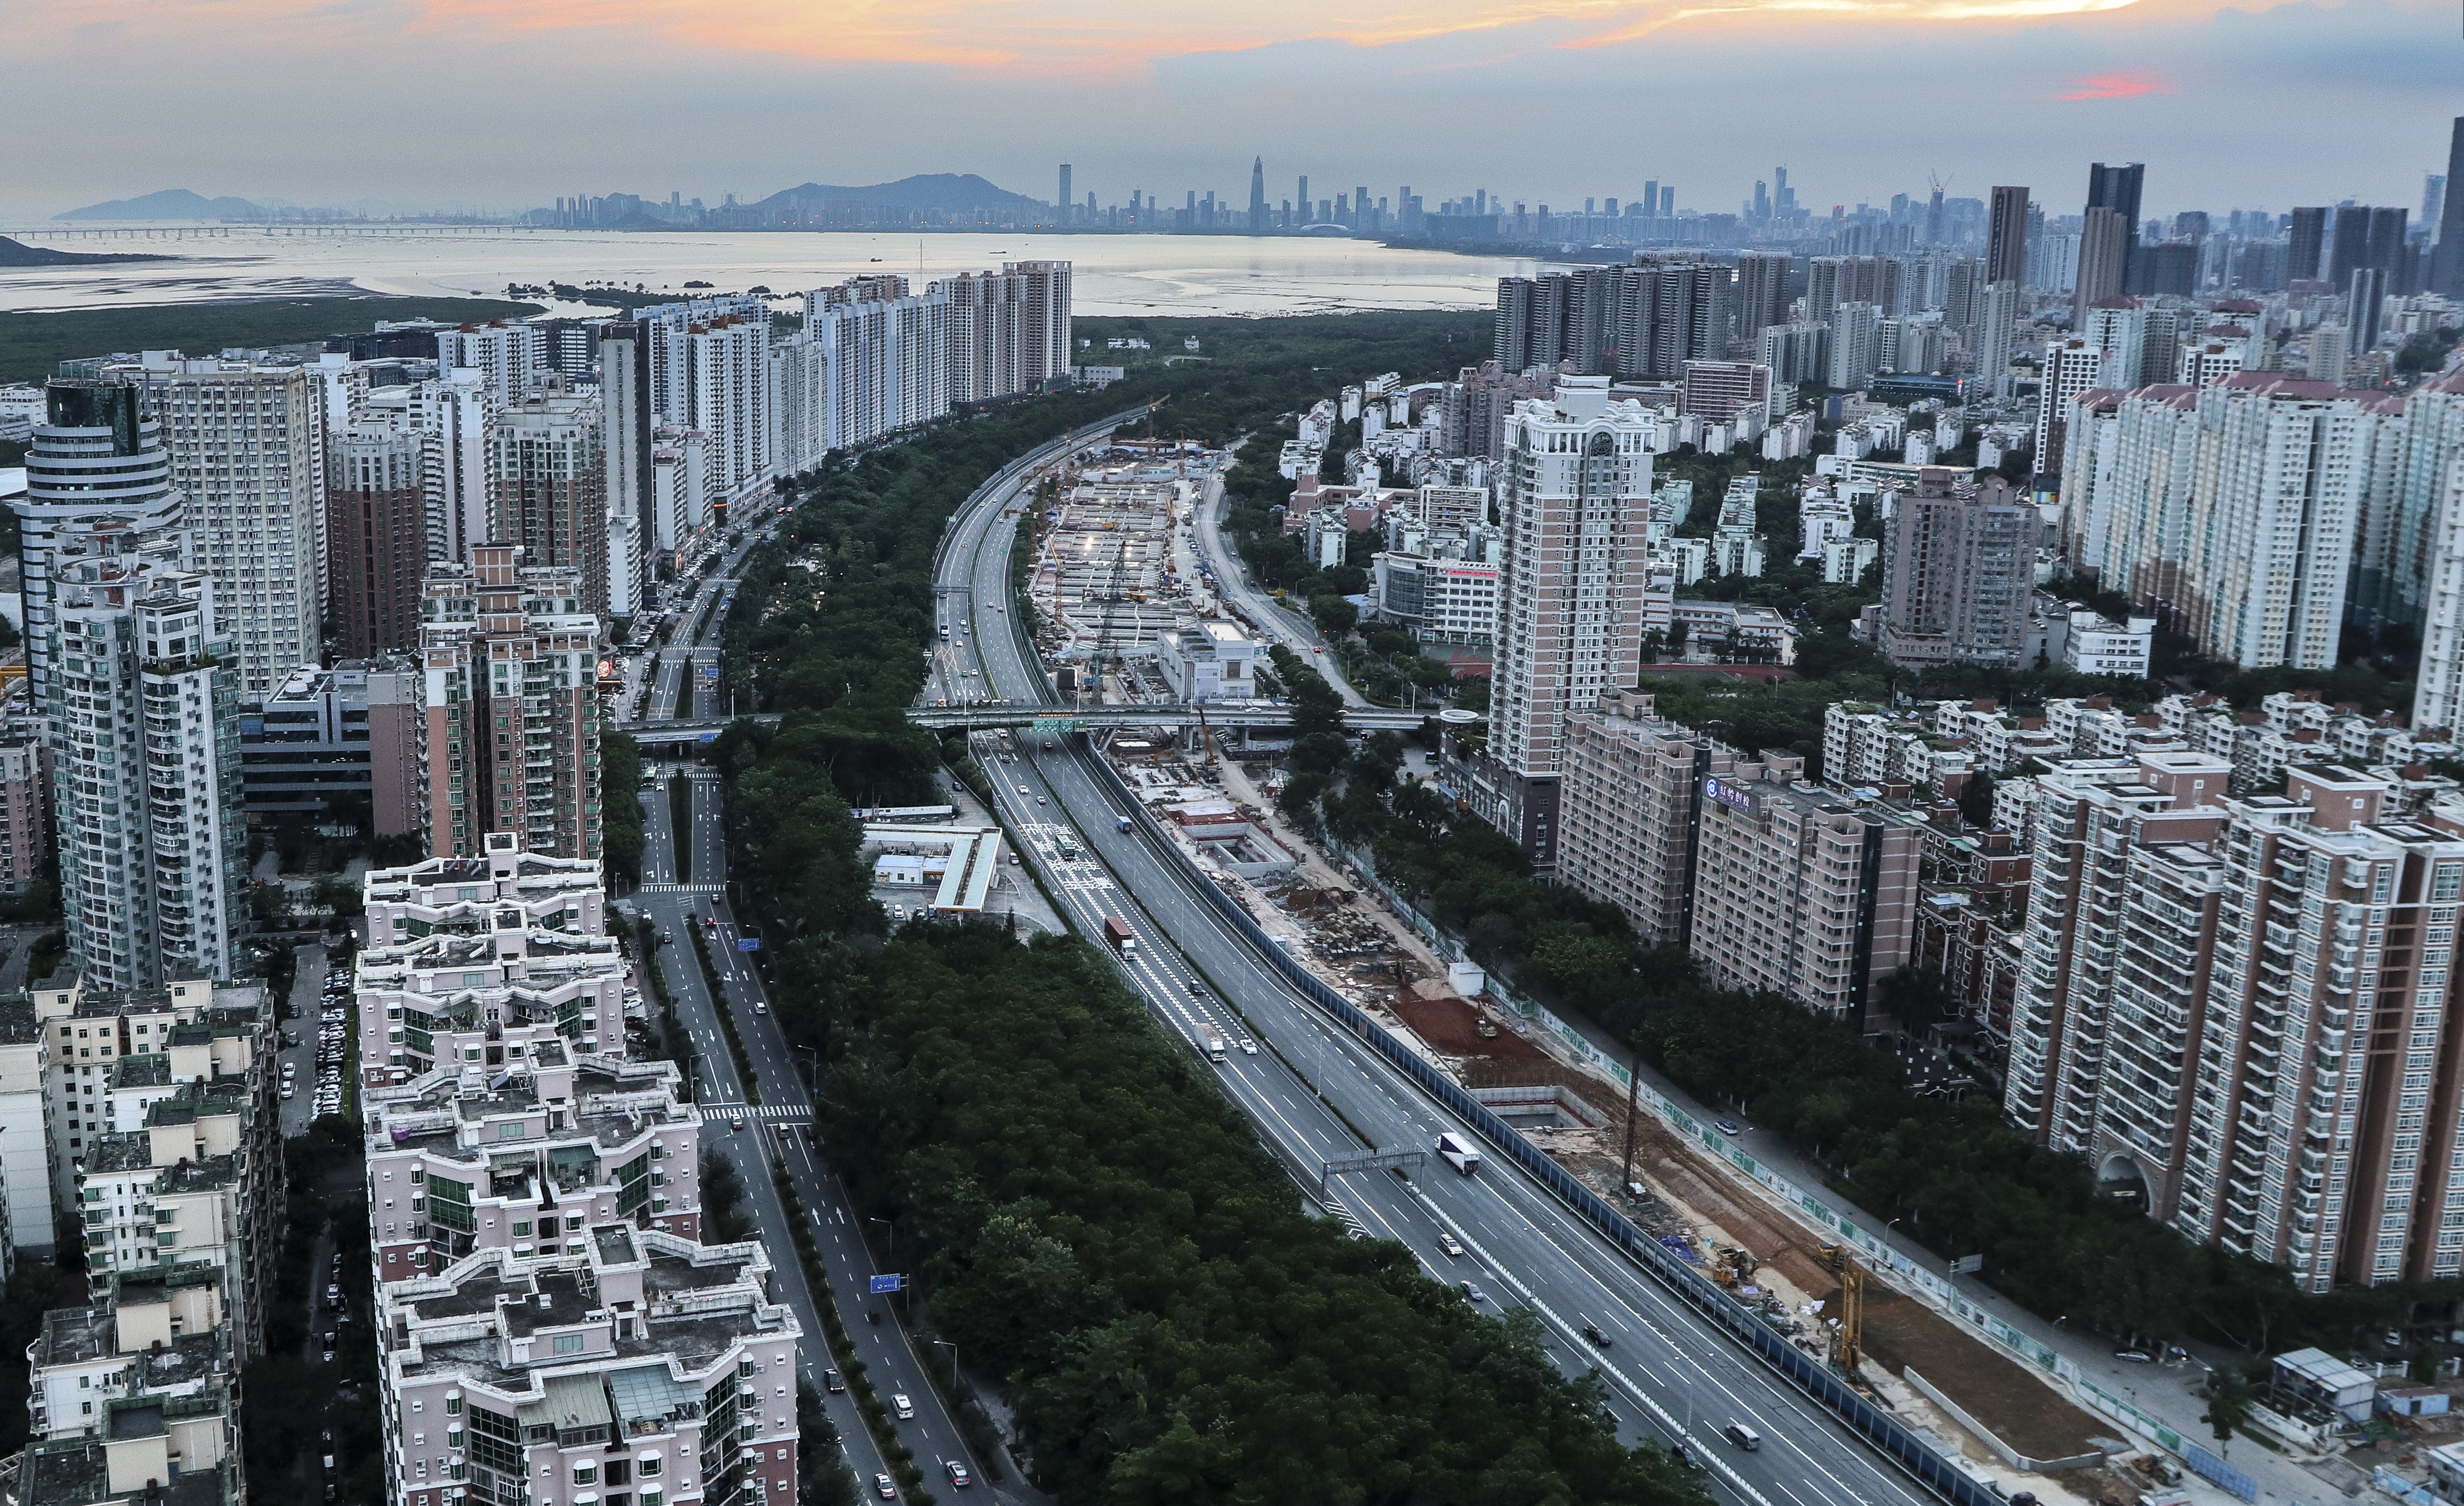 Shenzhen will be an important part of the Greater Bay Area. Photo: Roy Issa